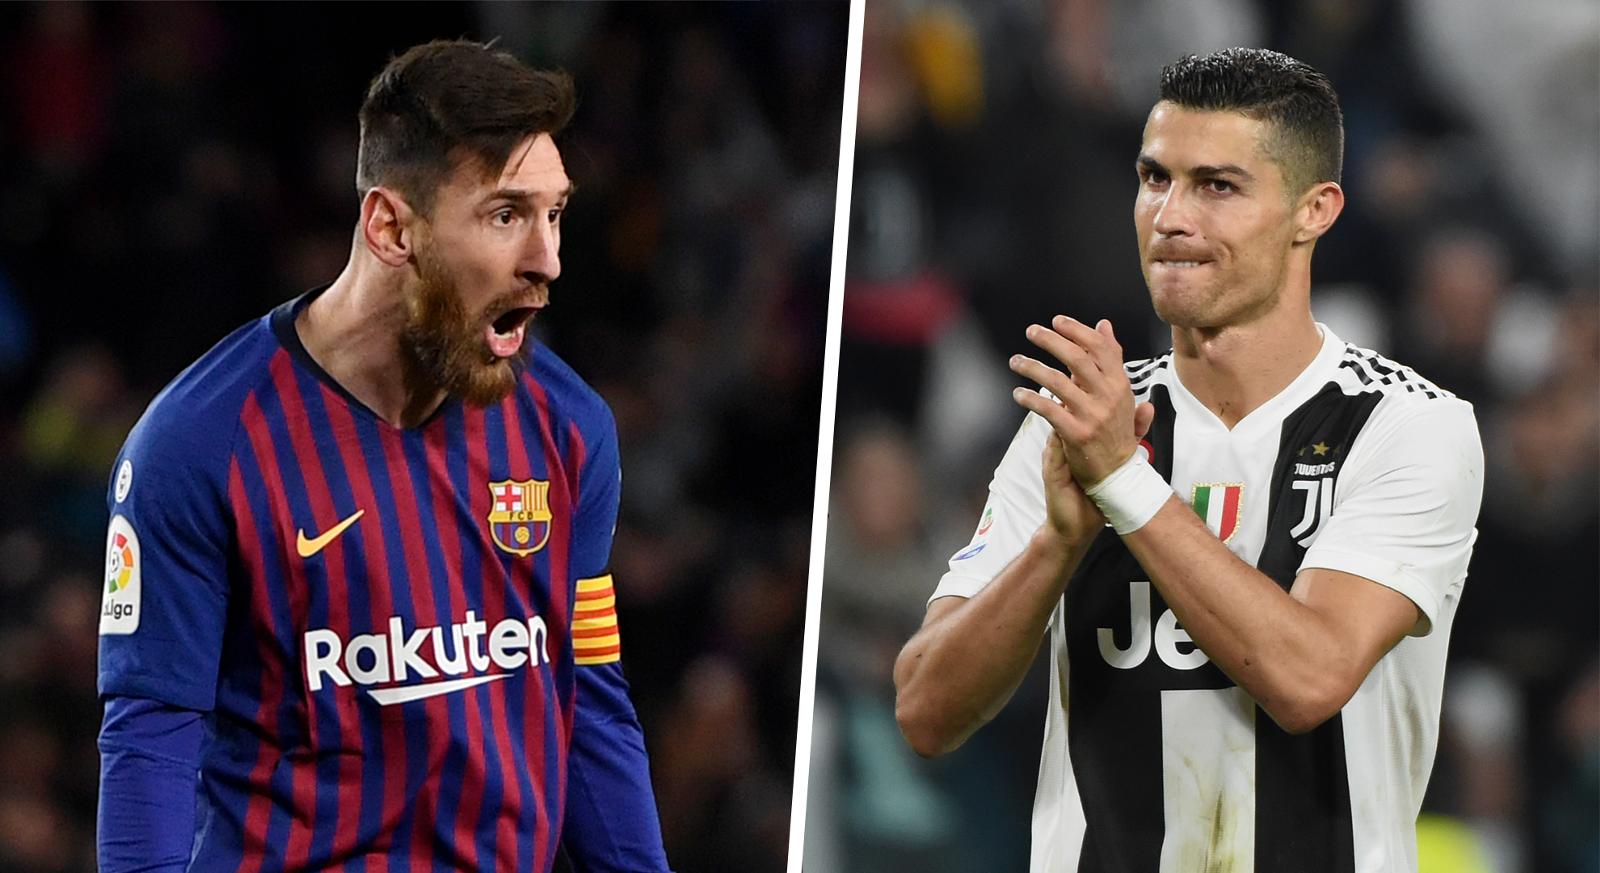 Cristiano Ronaldo praises Messi for making him “a better player”